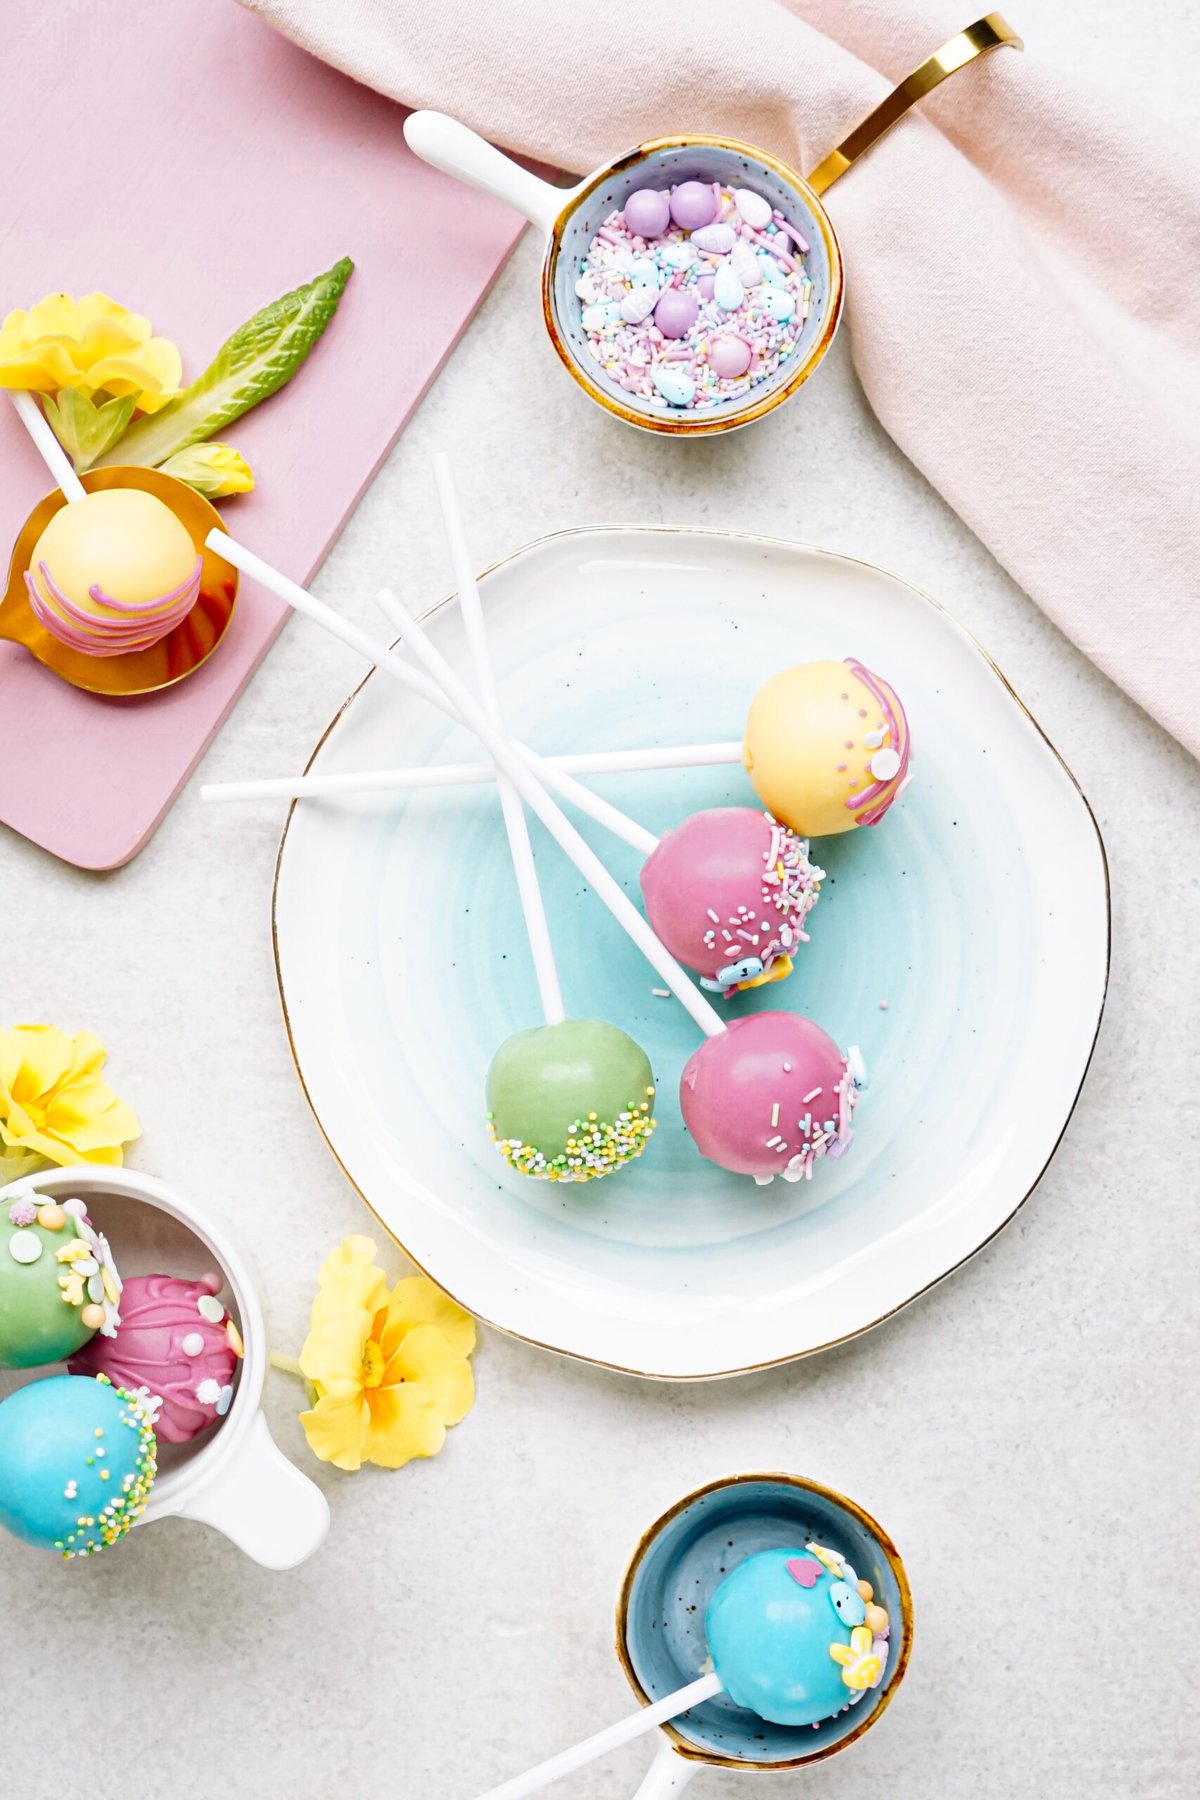 Colorful cake pops decorated with sprinkles, presented on a pastel dish alongside spring flowers and decorative eggs.